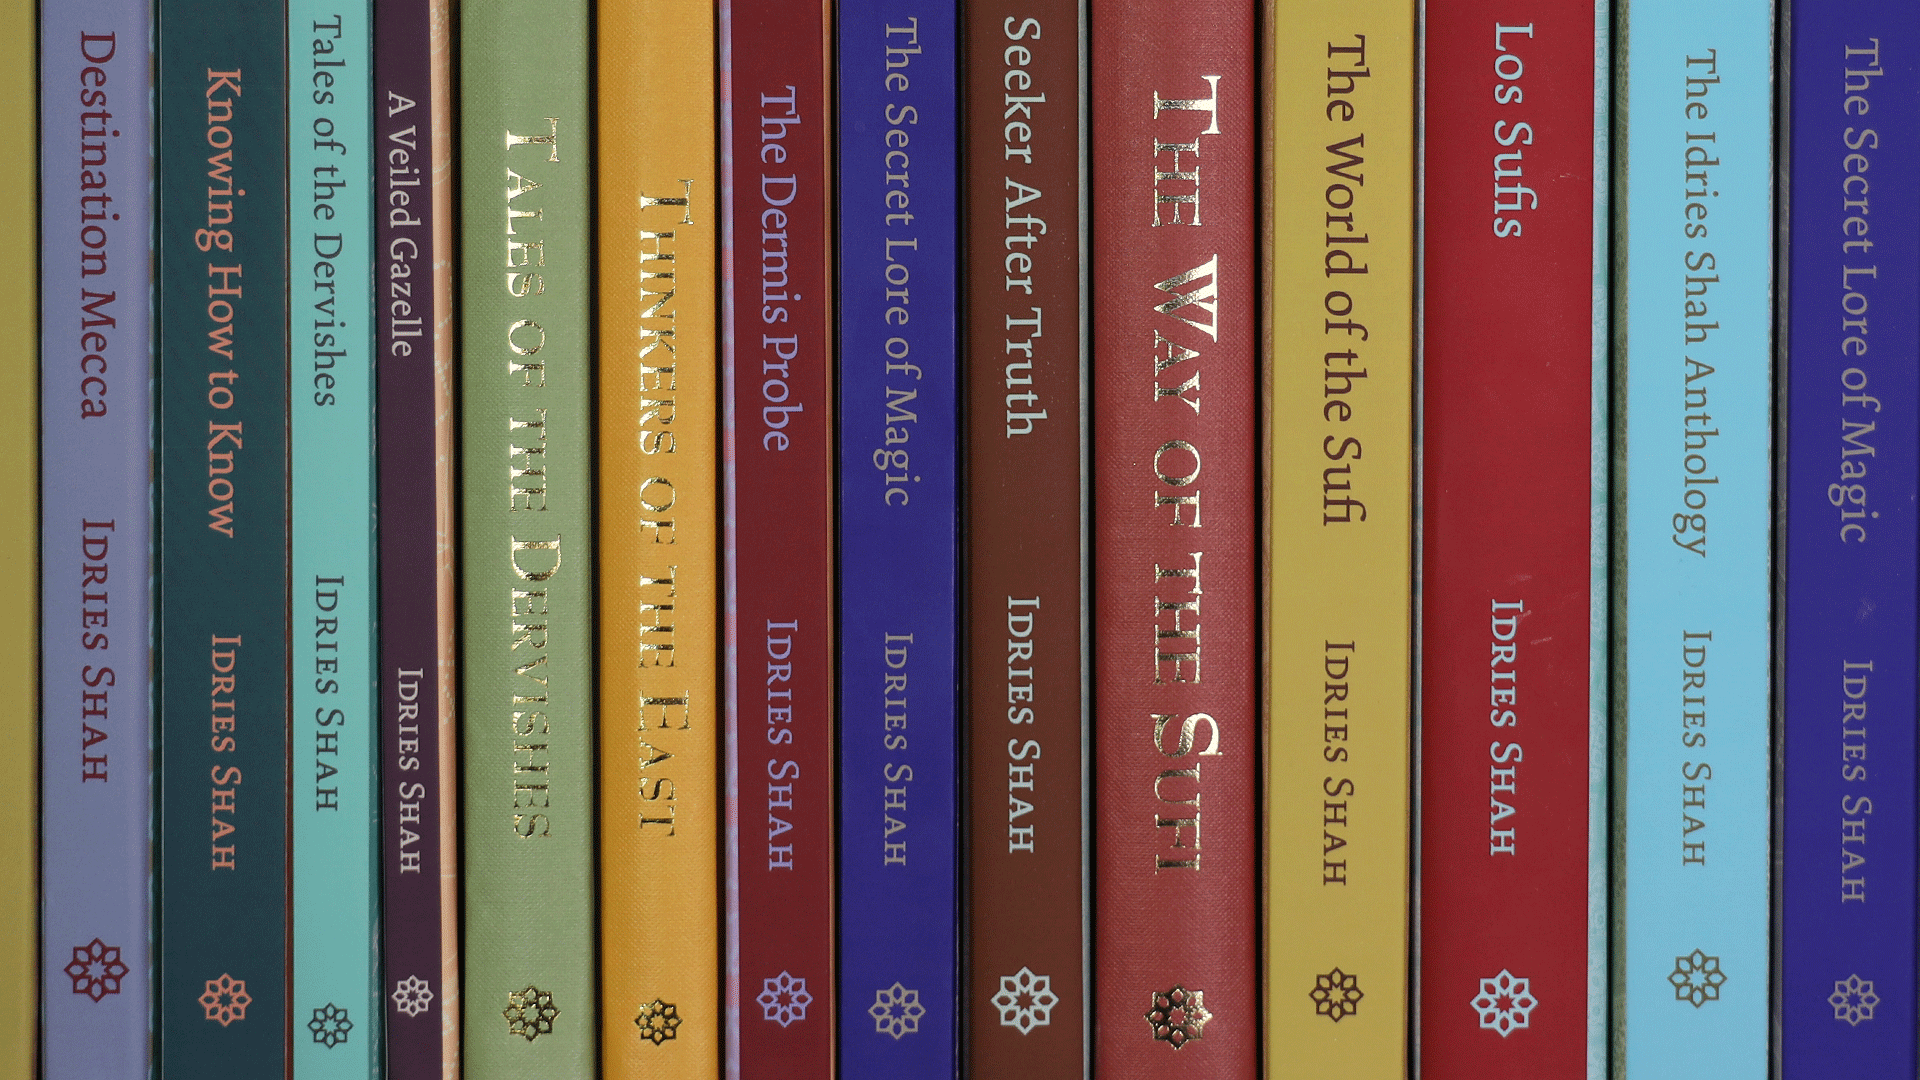 The Idries Shah collection